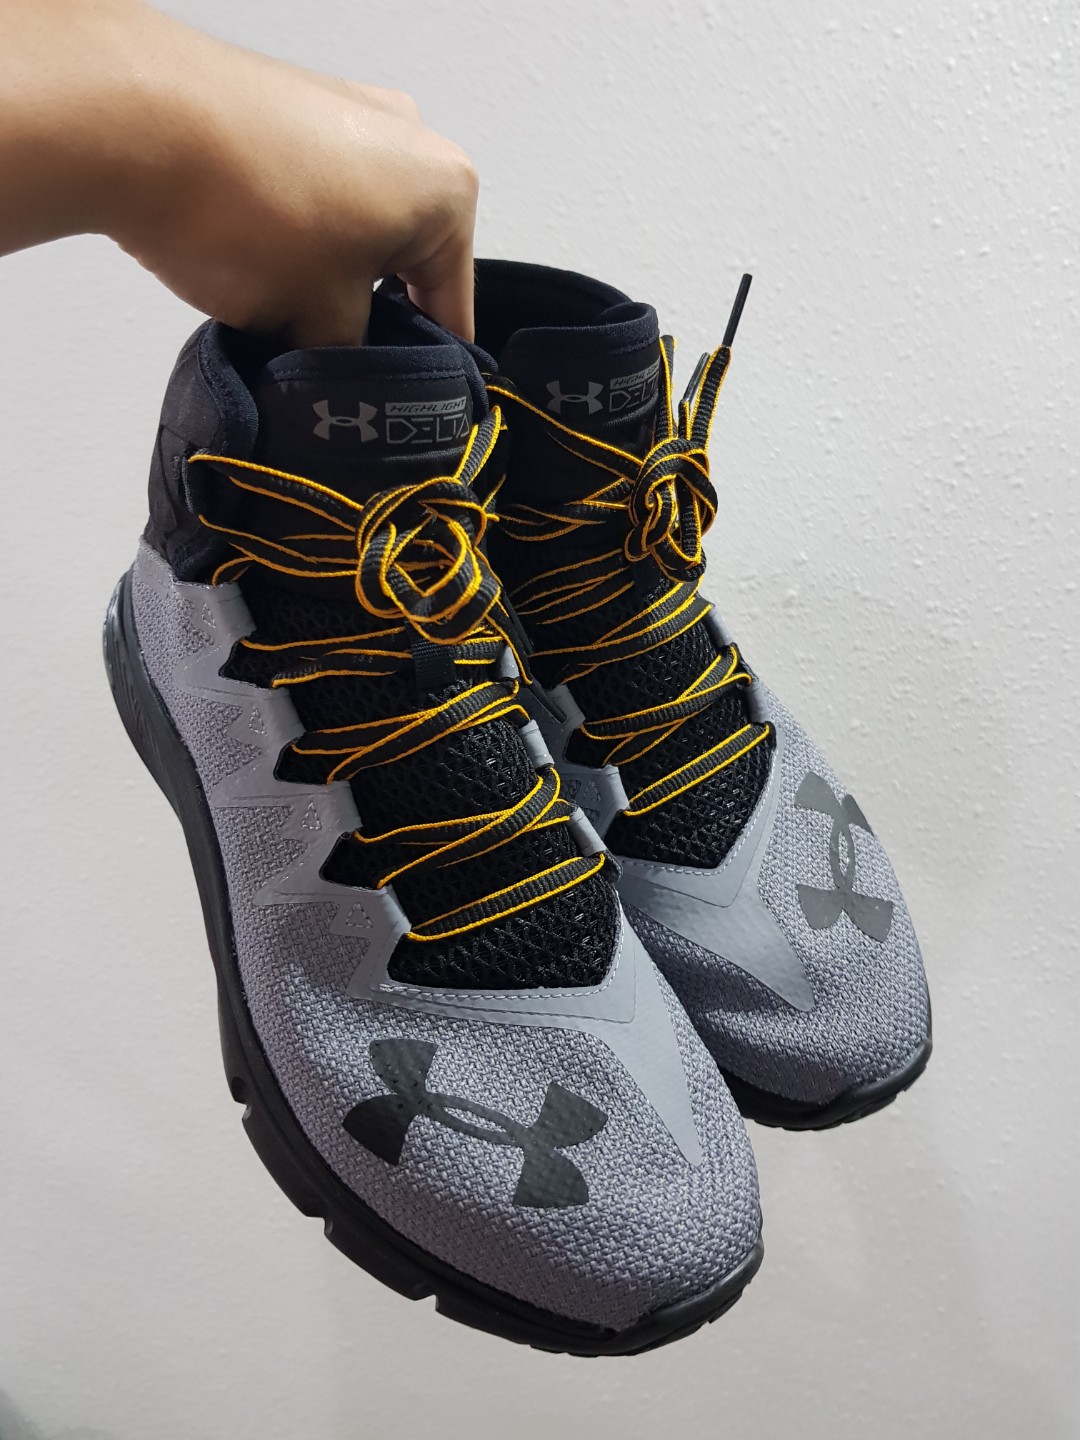 under armour rock shoes price